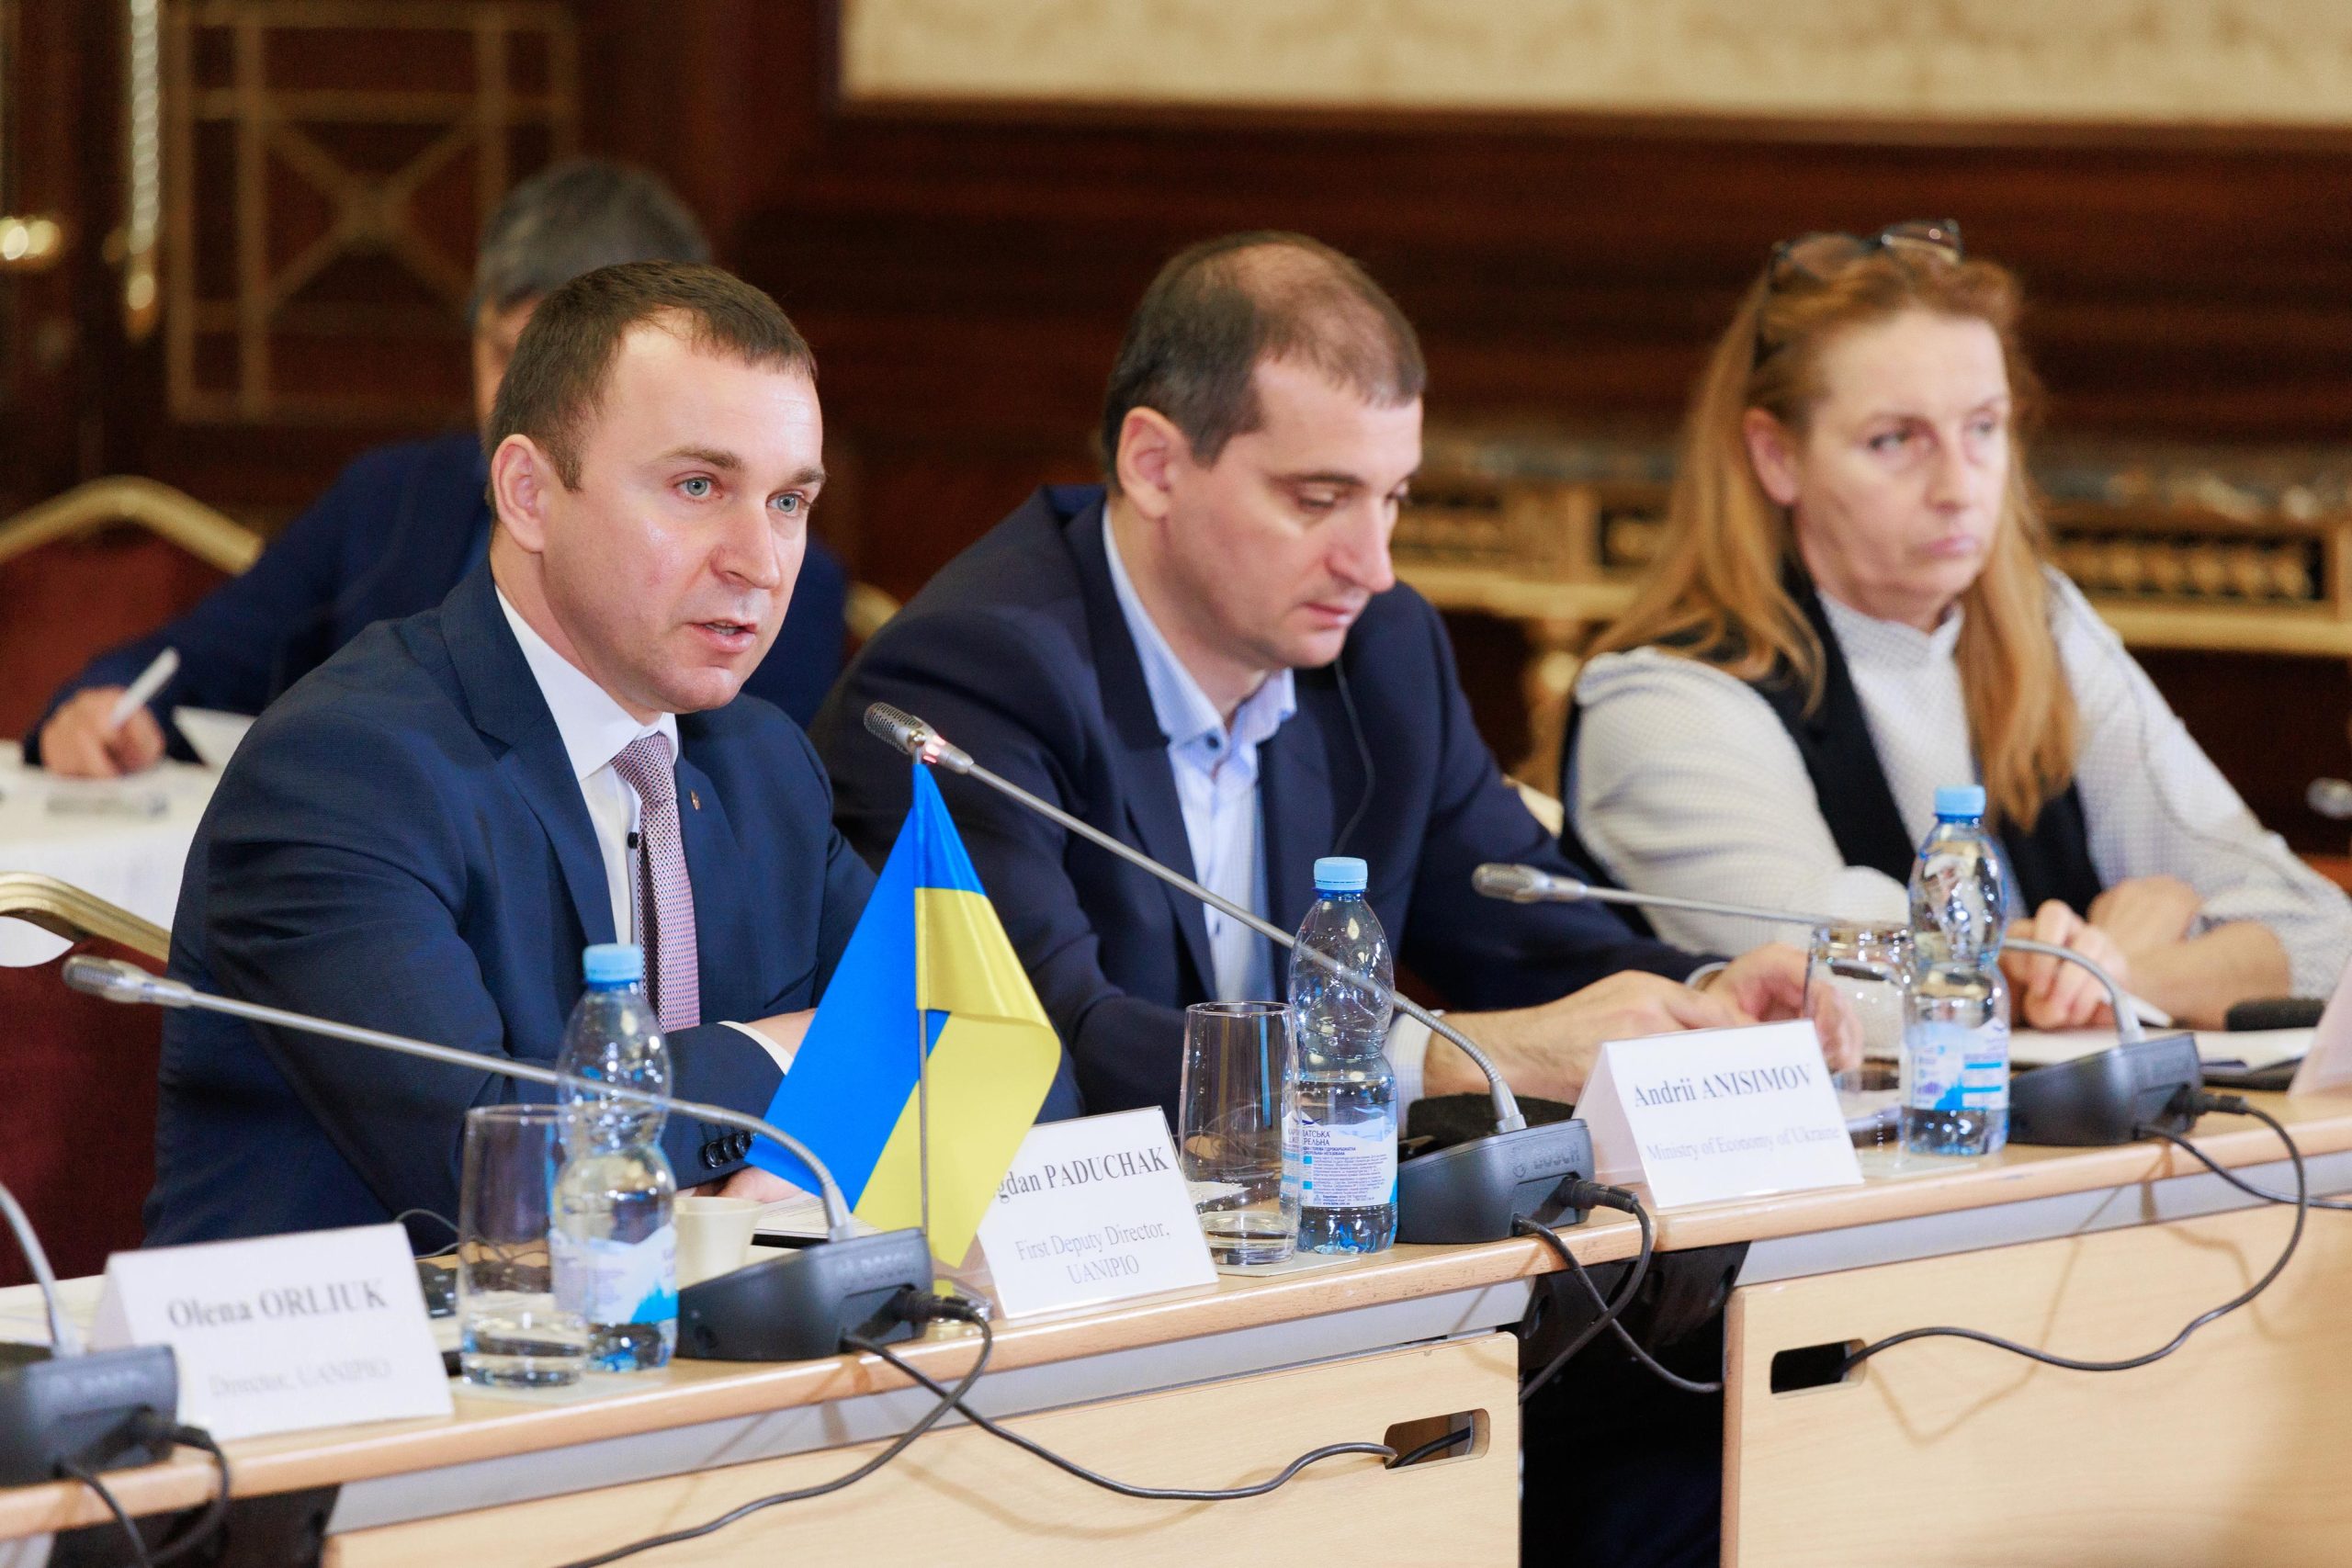 Discussion: How to Create a Sustainable System for Ukraine’s Competitiveness in IP Industry at International Level